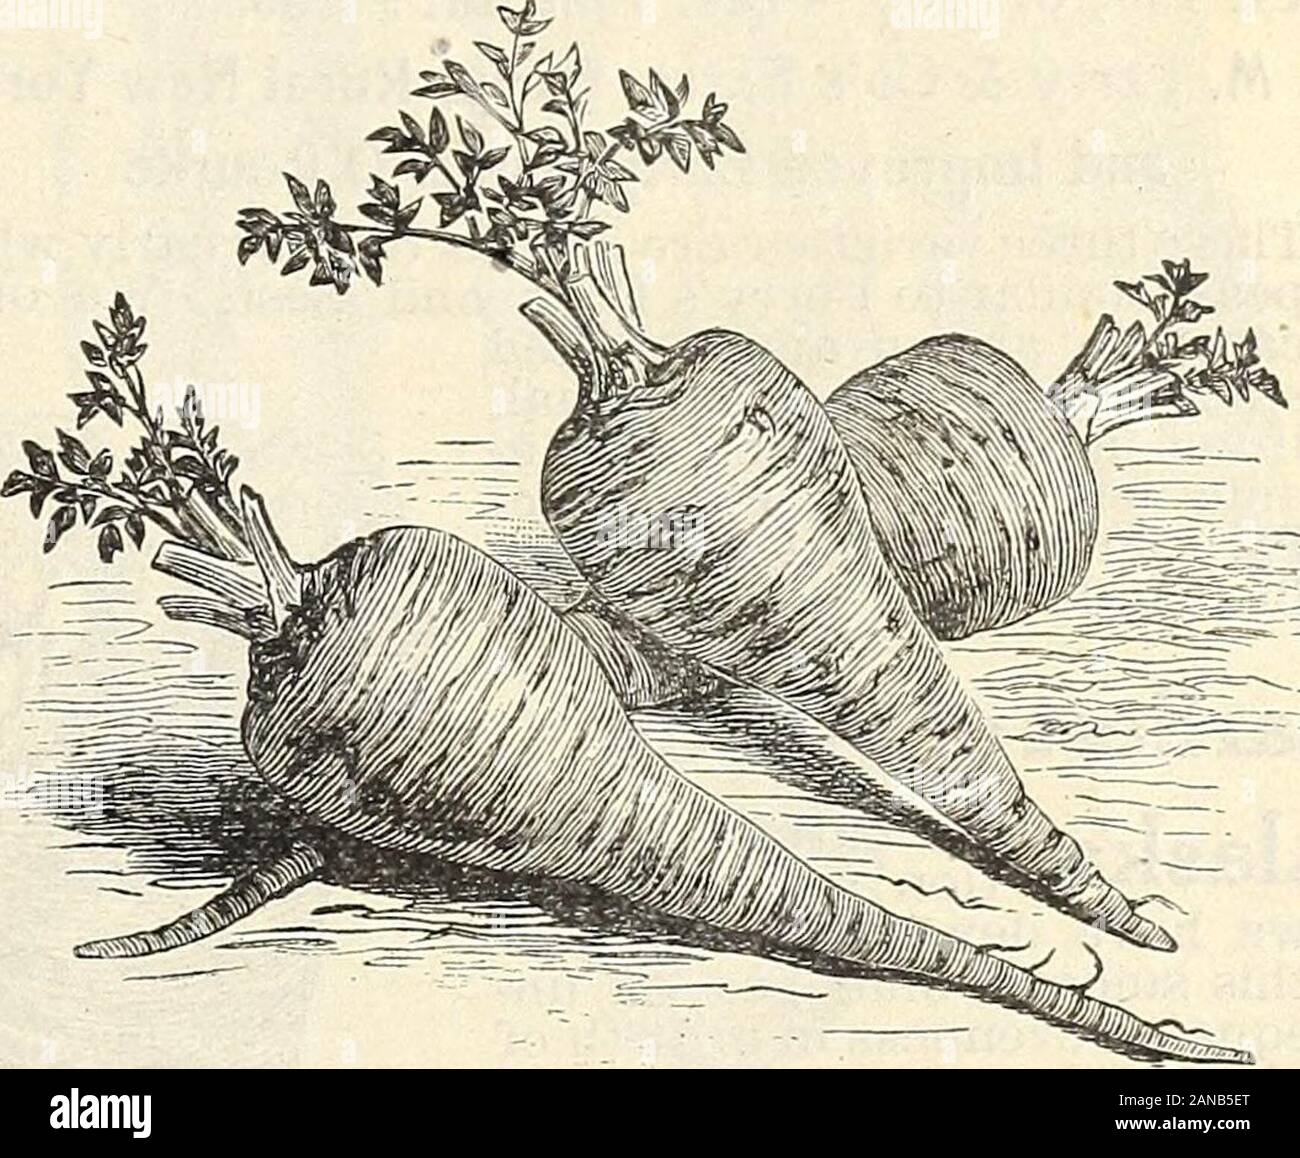 Seed annual 1906 . Turnip-Rooted or Hamburg Parsley. TURNIP=ROOTED, OR HAMBURG. The root is th«edible portion of this variety and resembles a small parsnipboth in color and shape. Flesh white, a little dry, and having a flavor similar to celeriac. Foliage same as PlairParslej^. Very hardy and should be cultivated like parsnip.Extensively grown and used for flavoring soups, etc-Pkt. 5c; Oz. 10c; 3 Oz. 15c; ^ Lb. 30c; Lb. 60c. Stock Photo